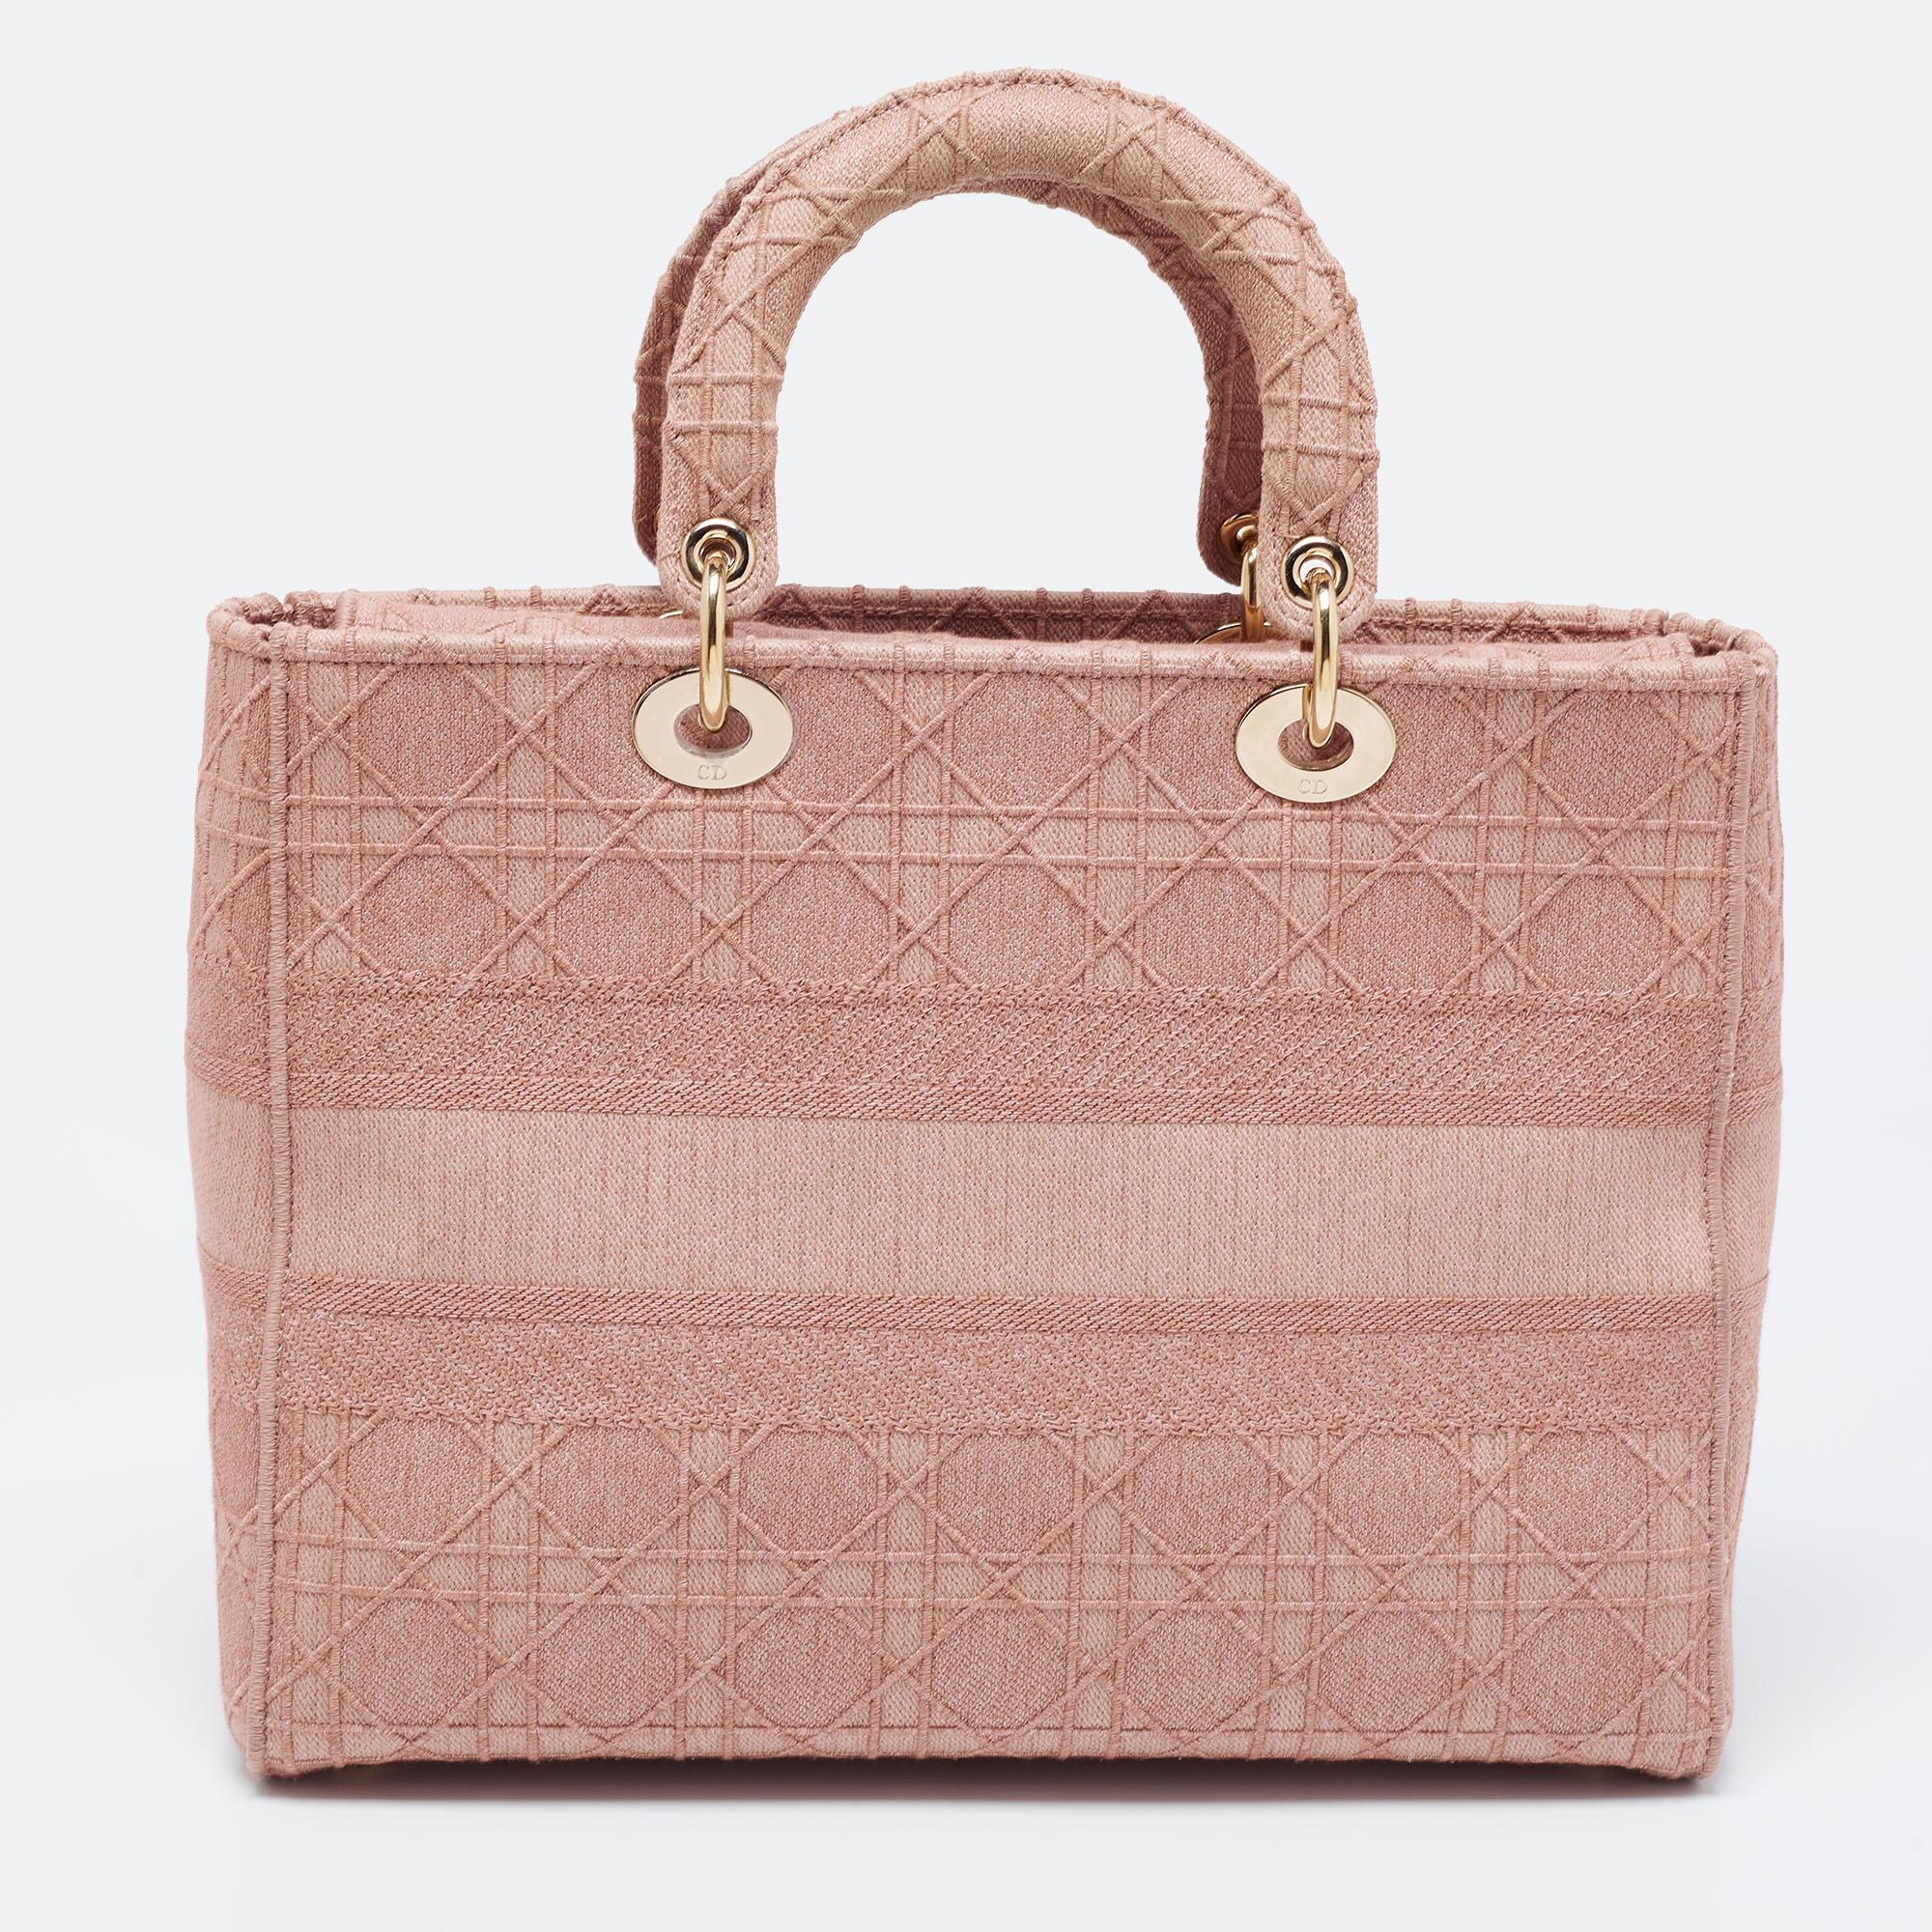 An iconic creation from the House of Dior, this Lady D-Lite tote brings eternal poise, gracefulness, and elegance to your appearance. This version comes crafted in light-pink Cannage-embroidered canvas, with gold-toned D.i.o.r charms attached to the